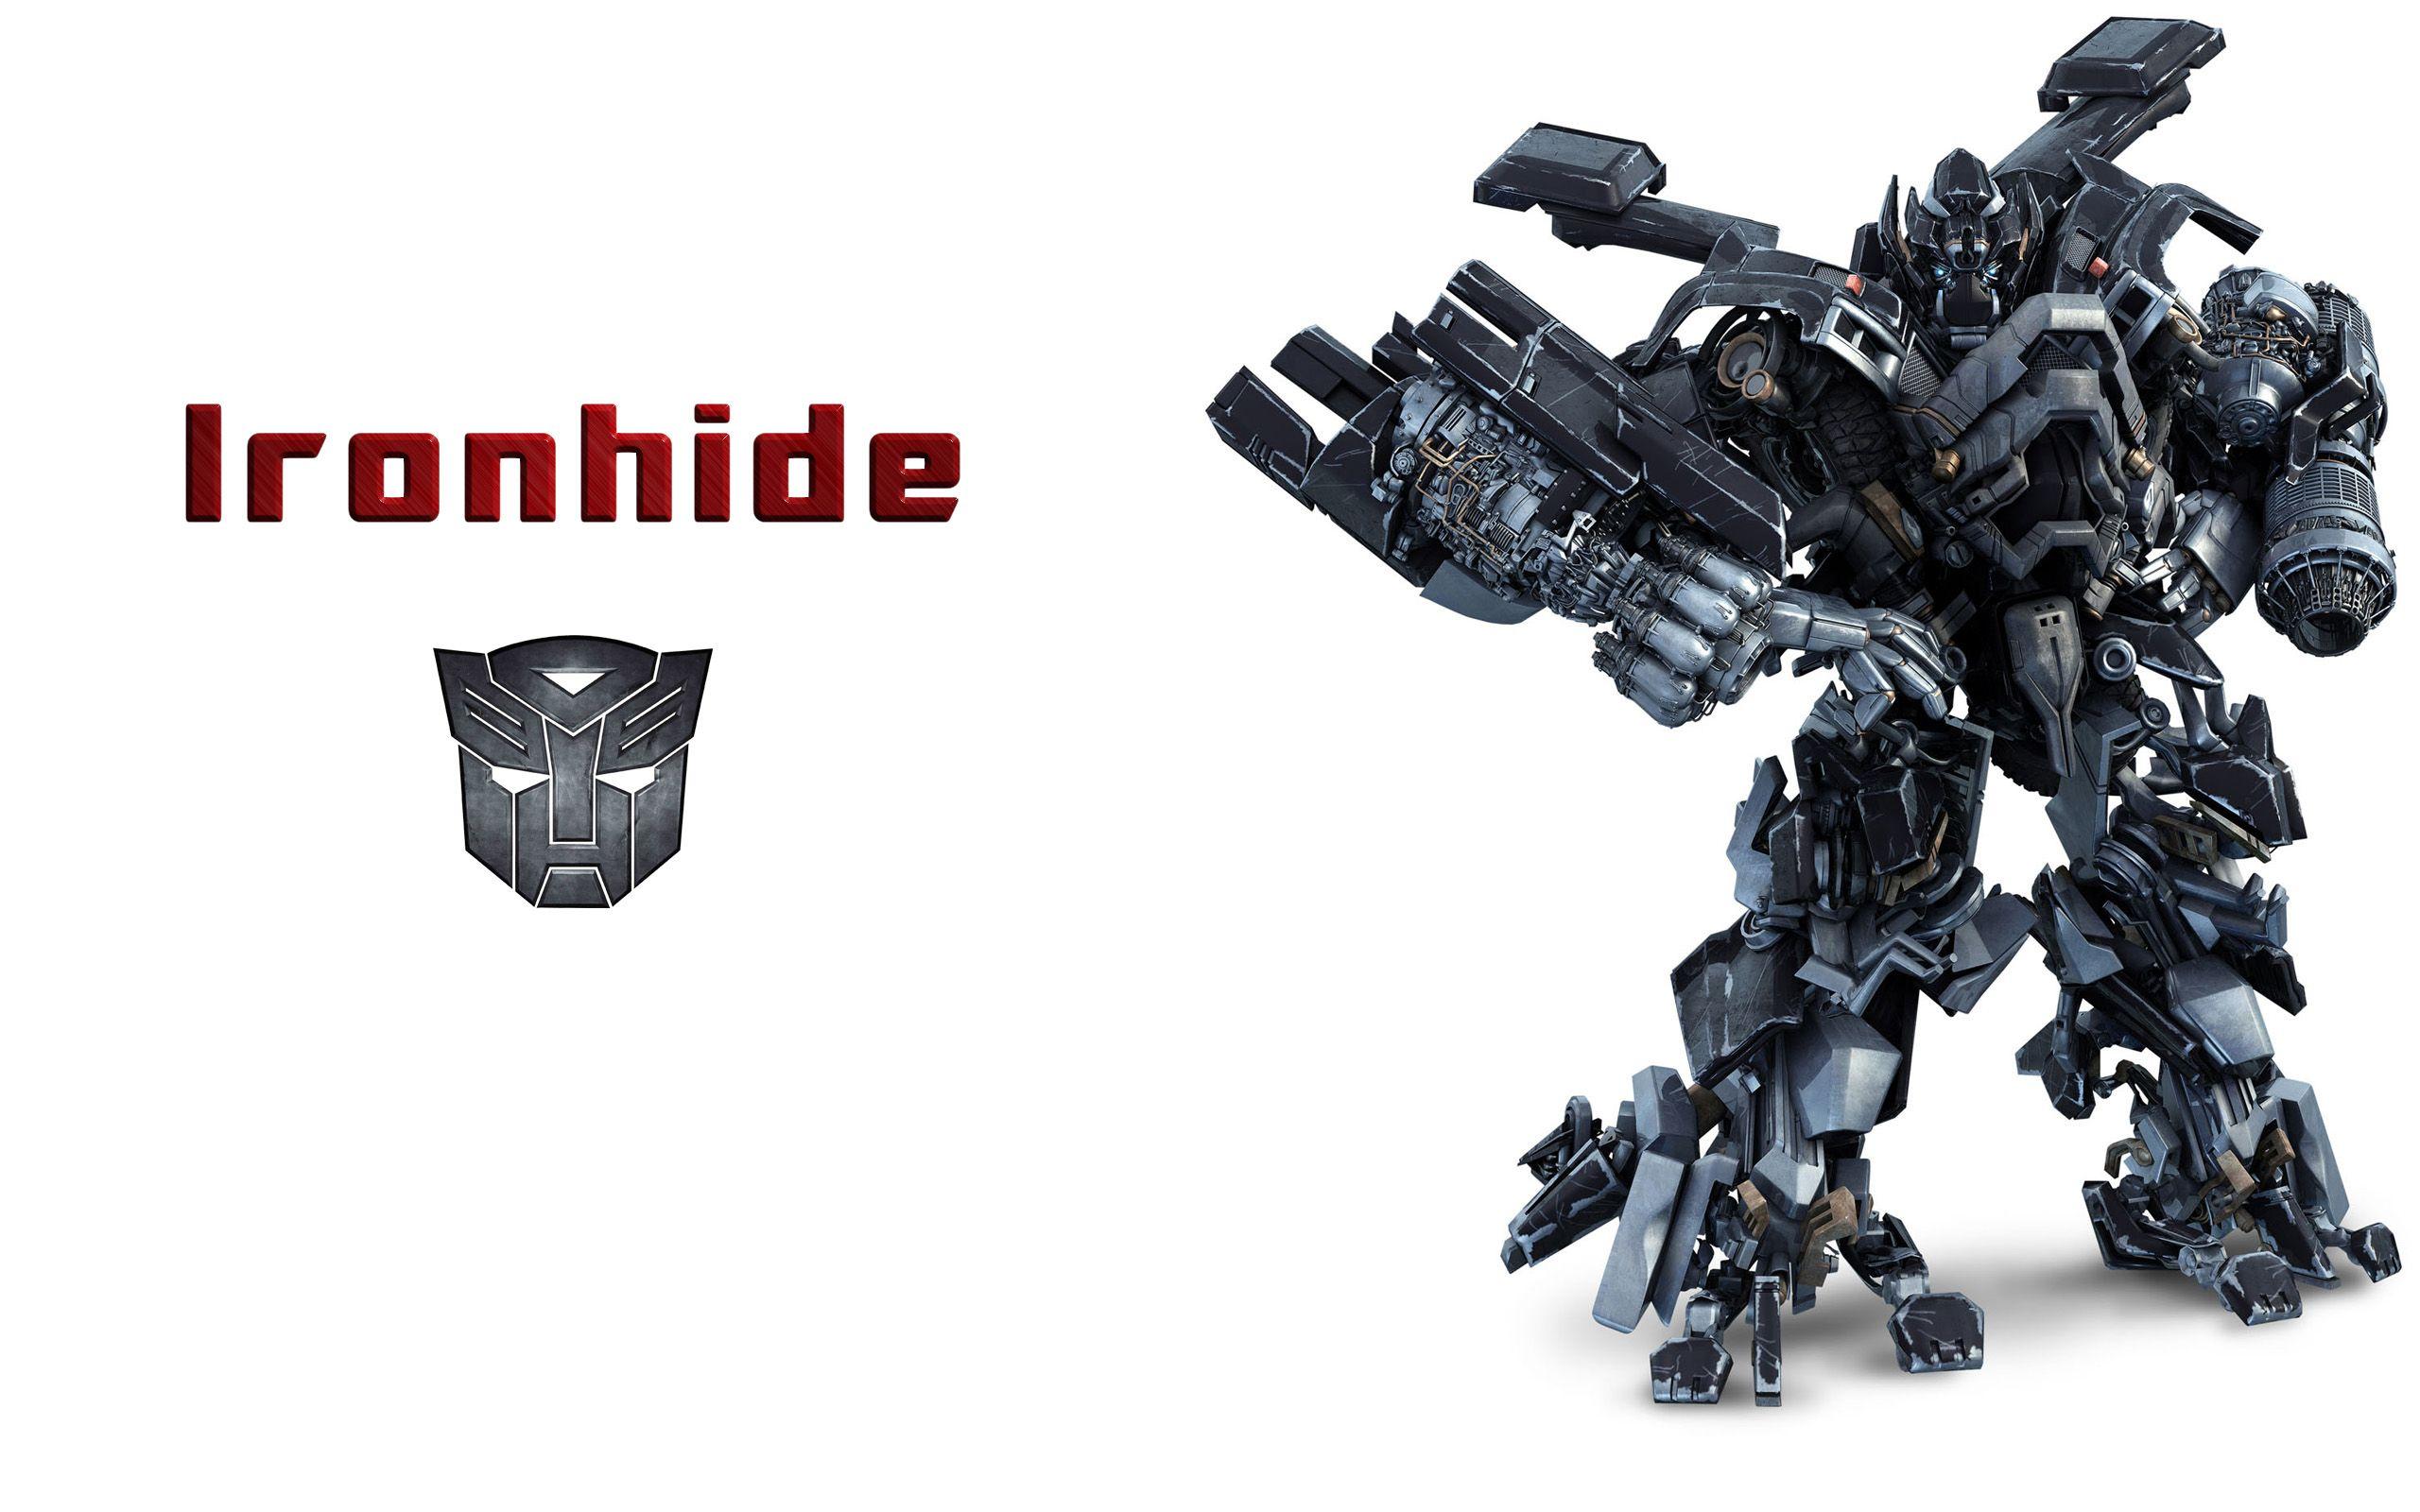 Gallery For Gt Ironhide Wallpaper